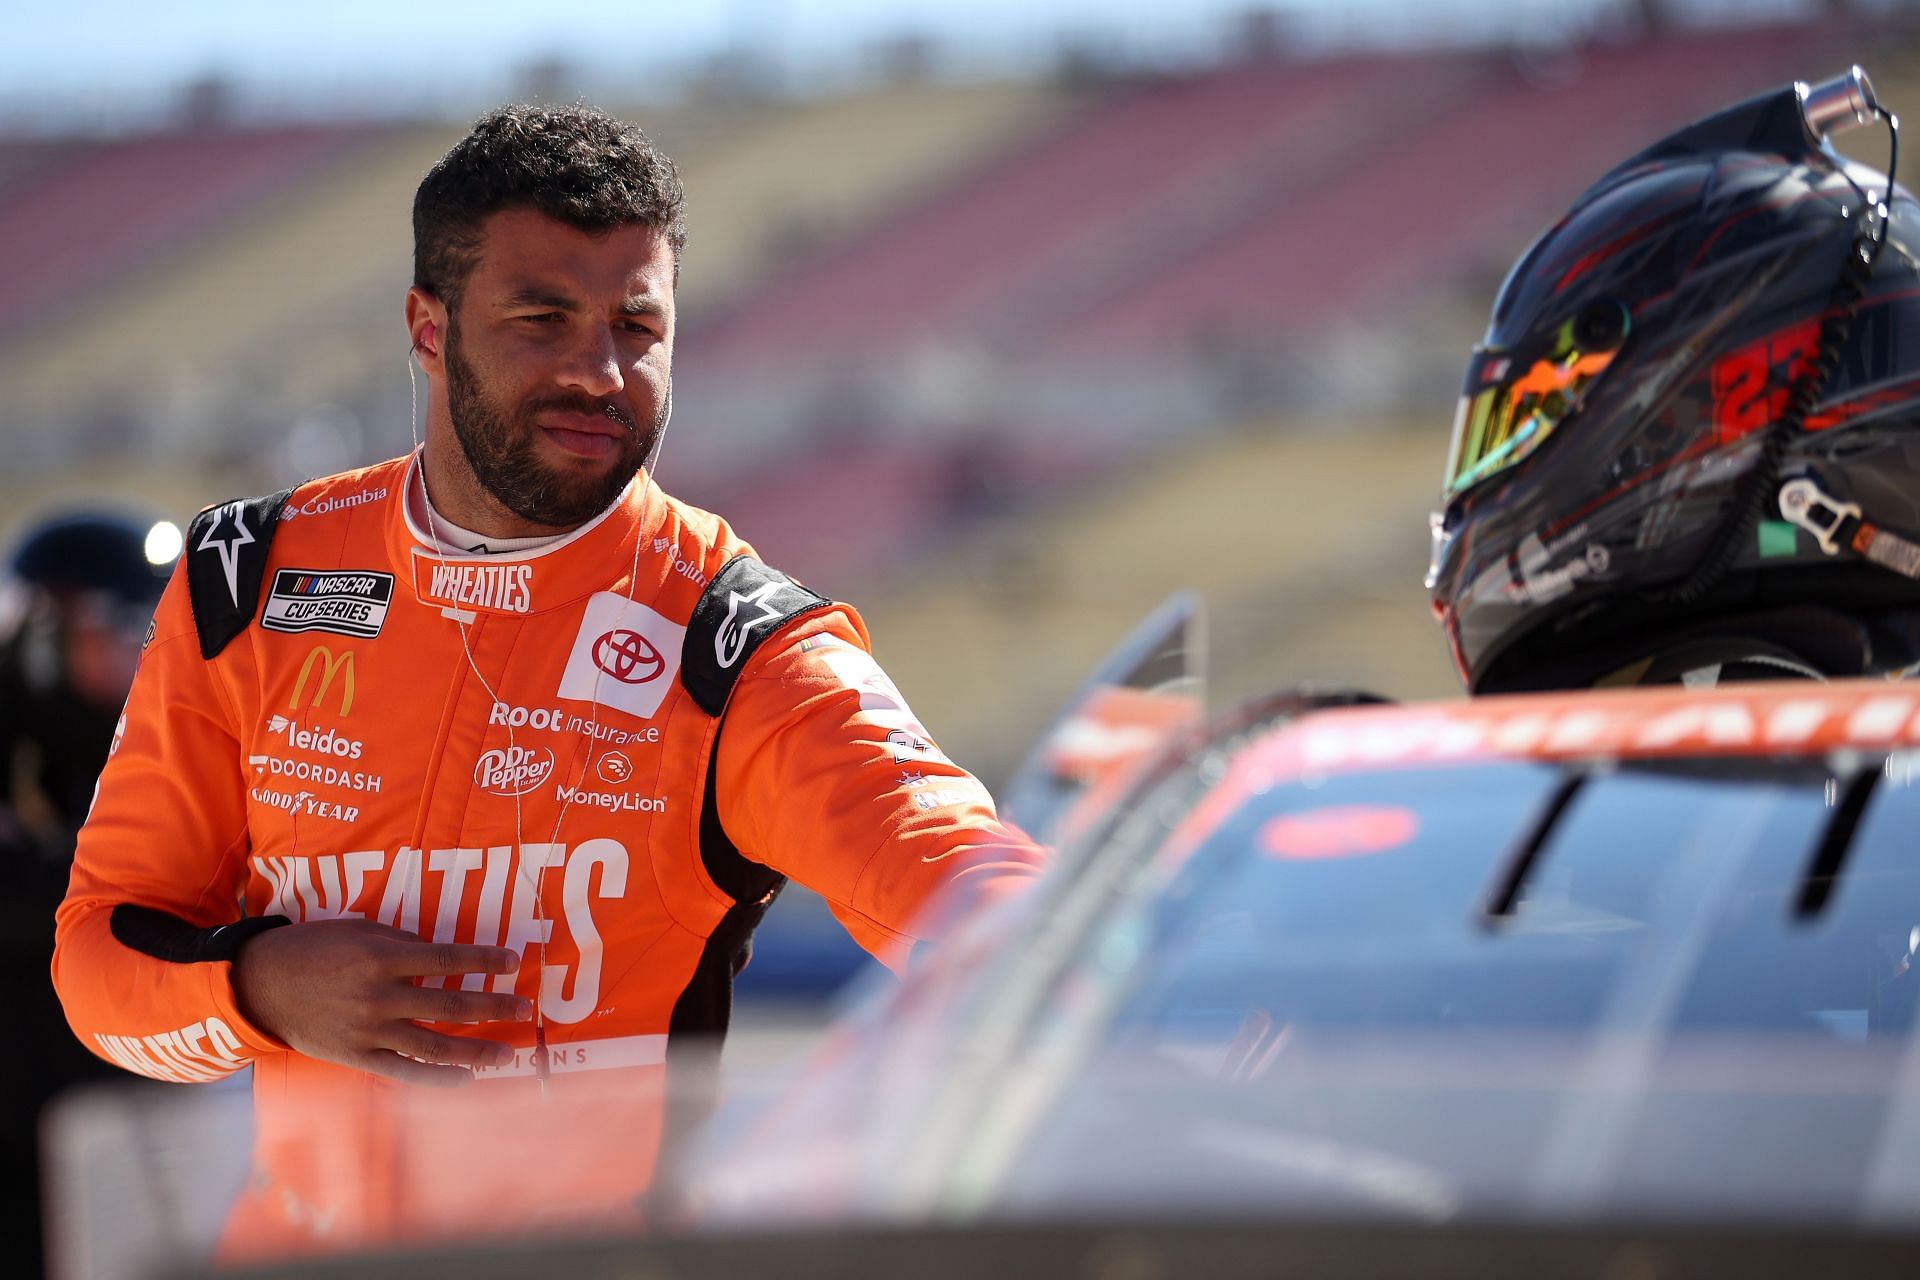 Bubba Wallace Jr. prepares for the NASCAR Cup Series Wise Power 400 at Auto Club Speedway.